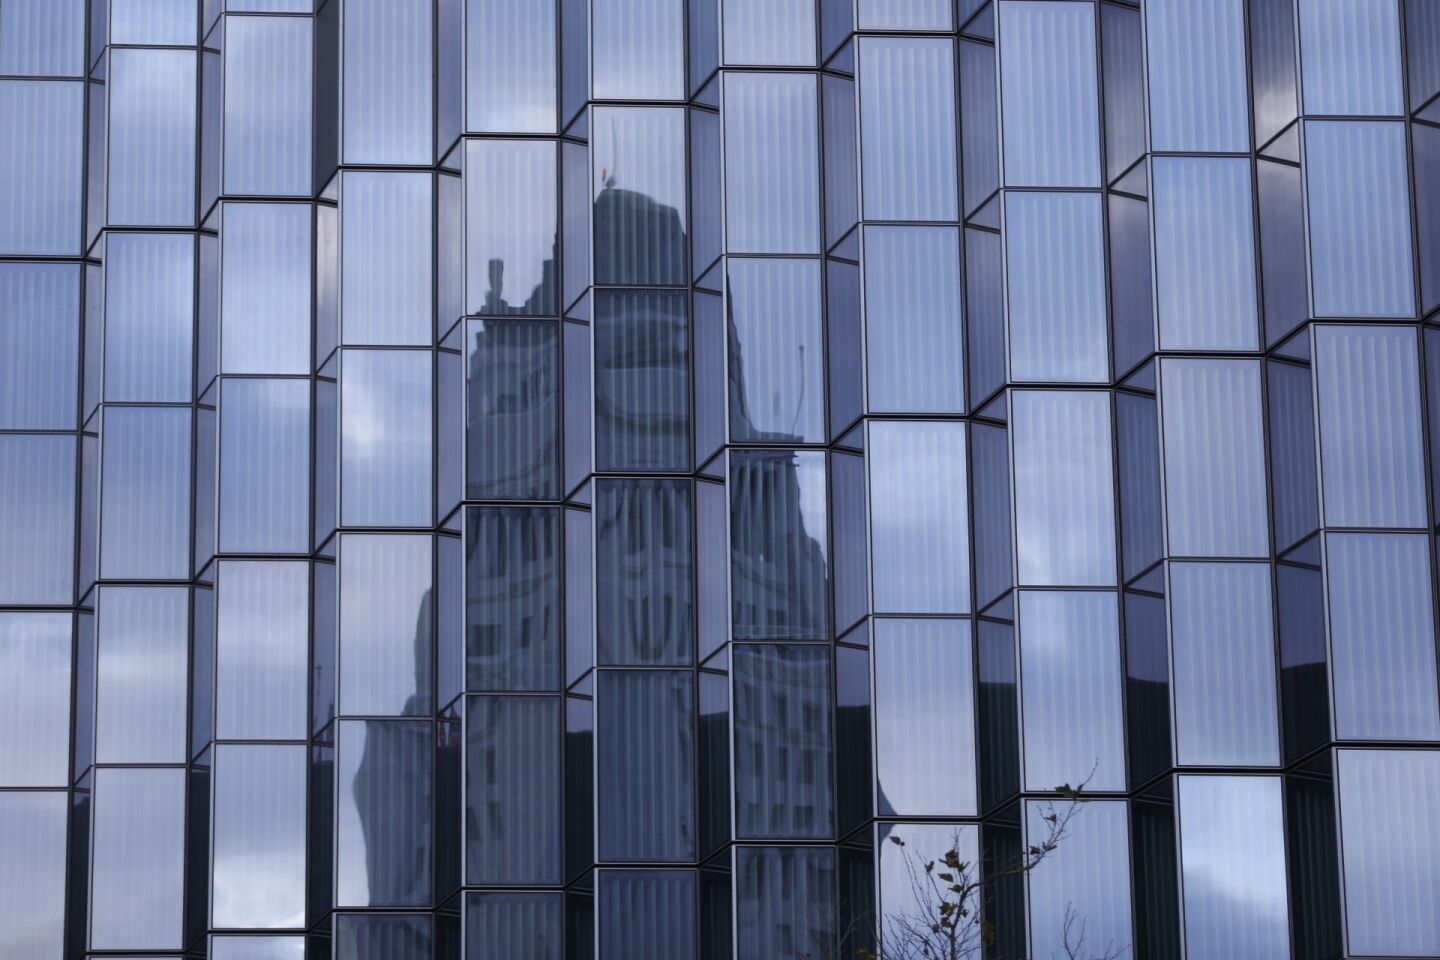 Los Angeles City Hall is surrounded by cloudy skies in a reflection in the windows of the new U.S. Courthouse under construction on Jan. 4.